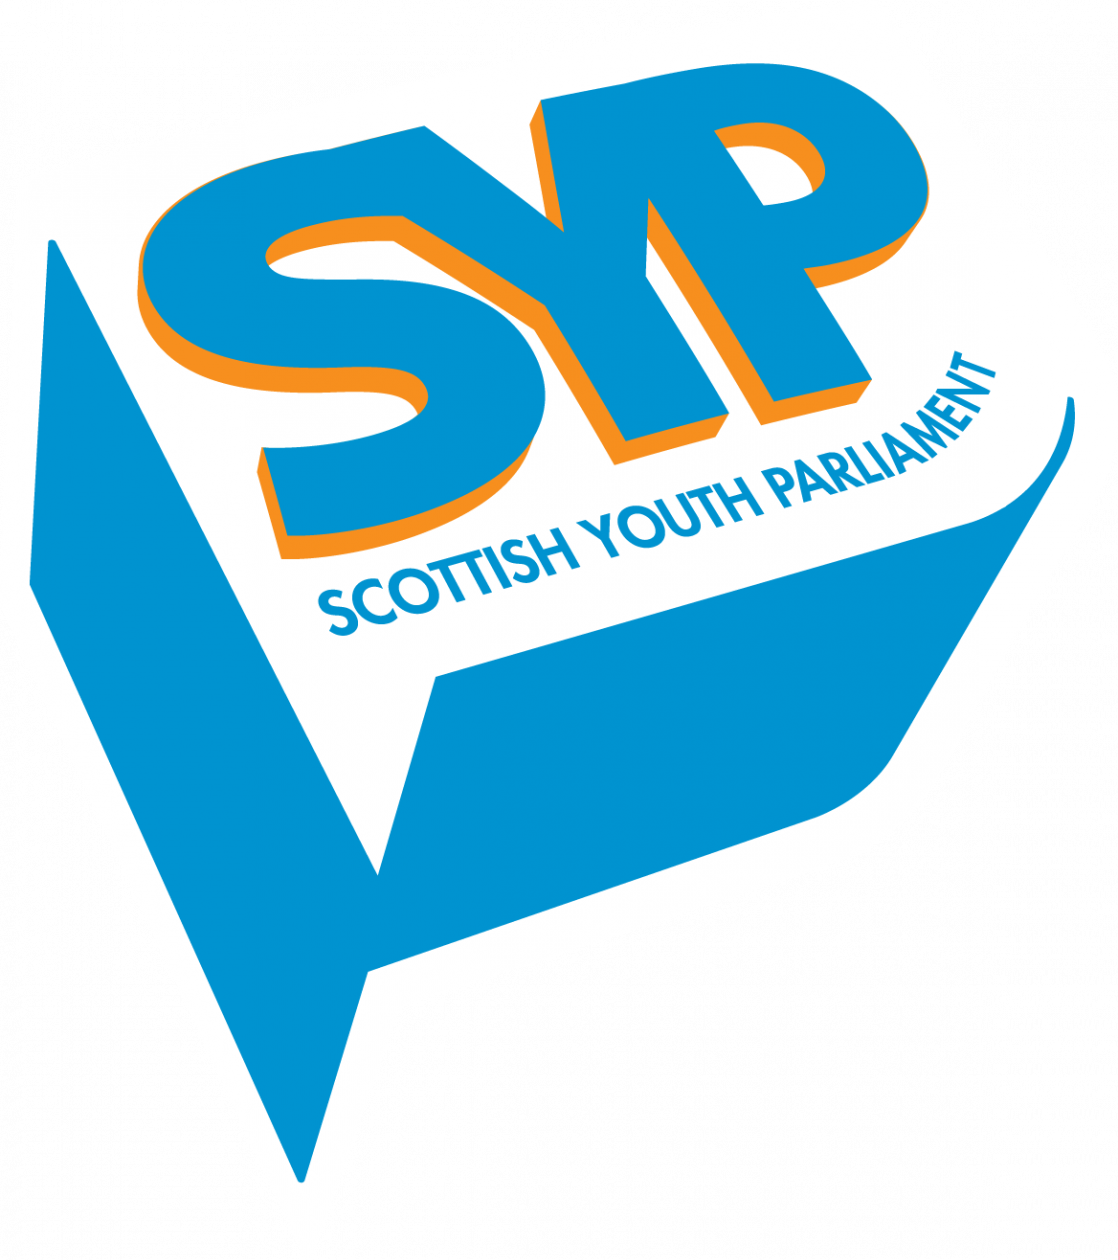 2017 Scottish Youth Parliament Elections: How to Vote